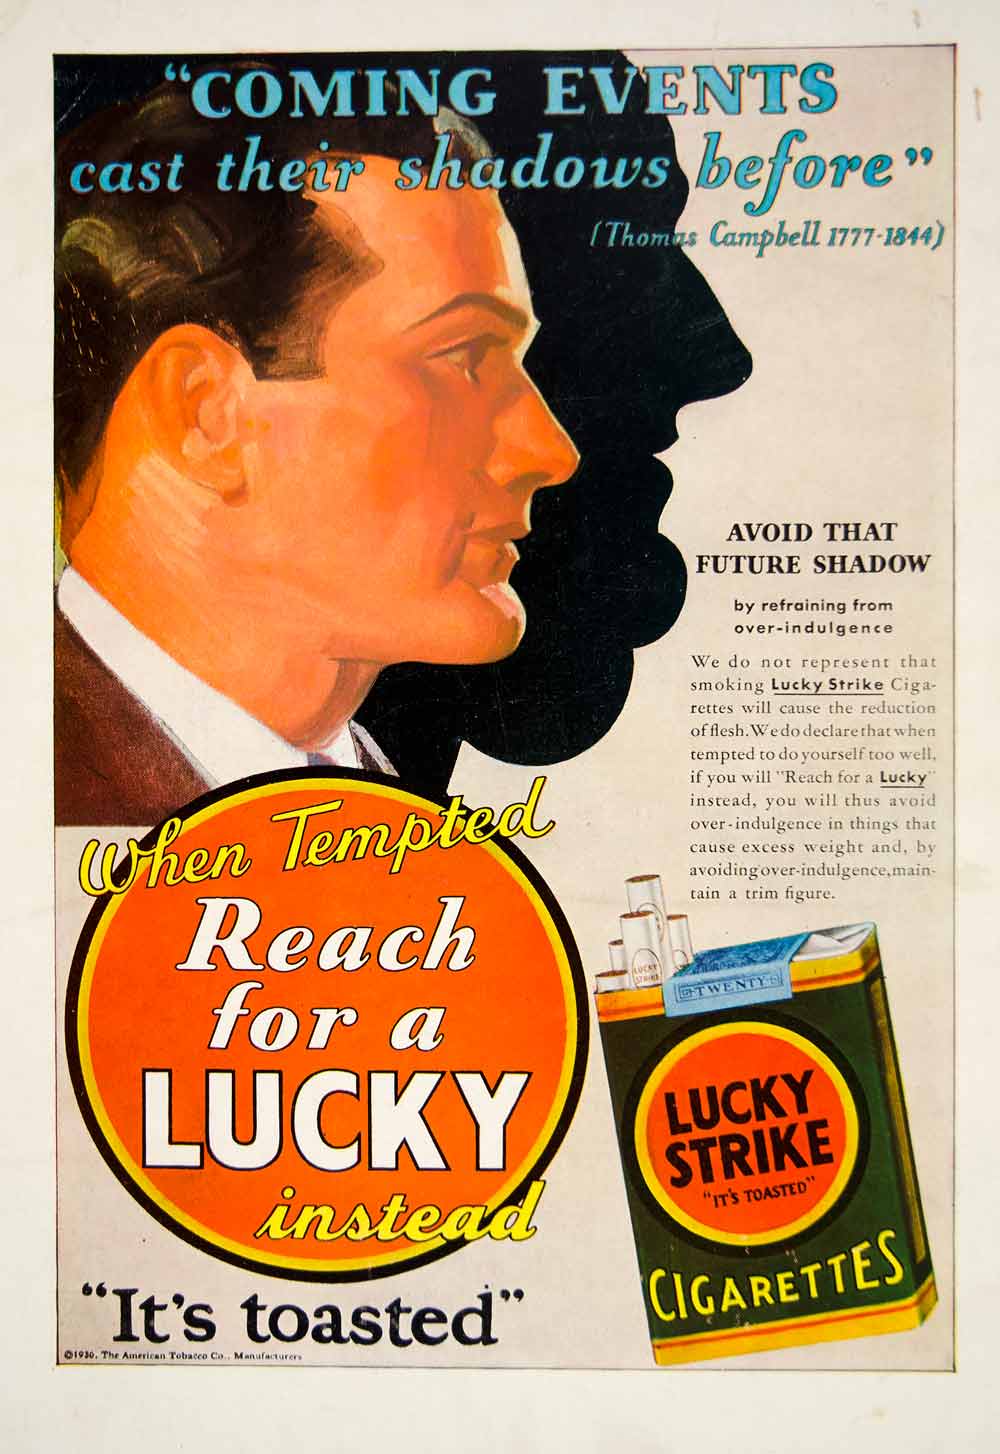 1930 Ad Vintage Lucky Strike Cigarettes Toasted Thomas Campbell Quotation YTMM5